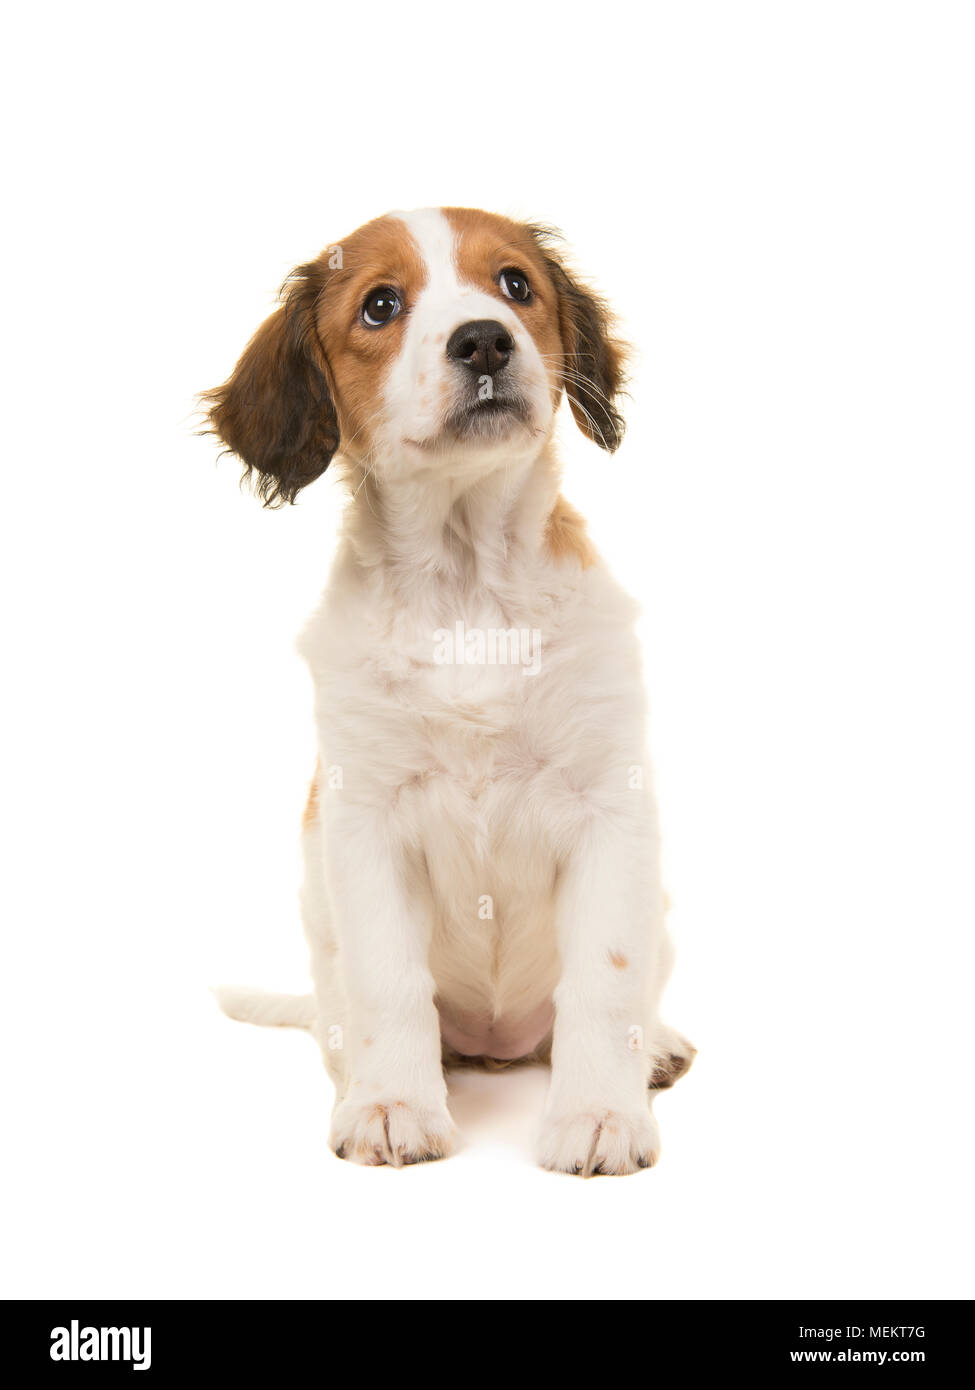 Adorable kooikerhondje puppy sitting and looking up isolated on a white background Stock Photo